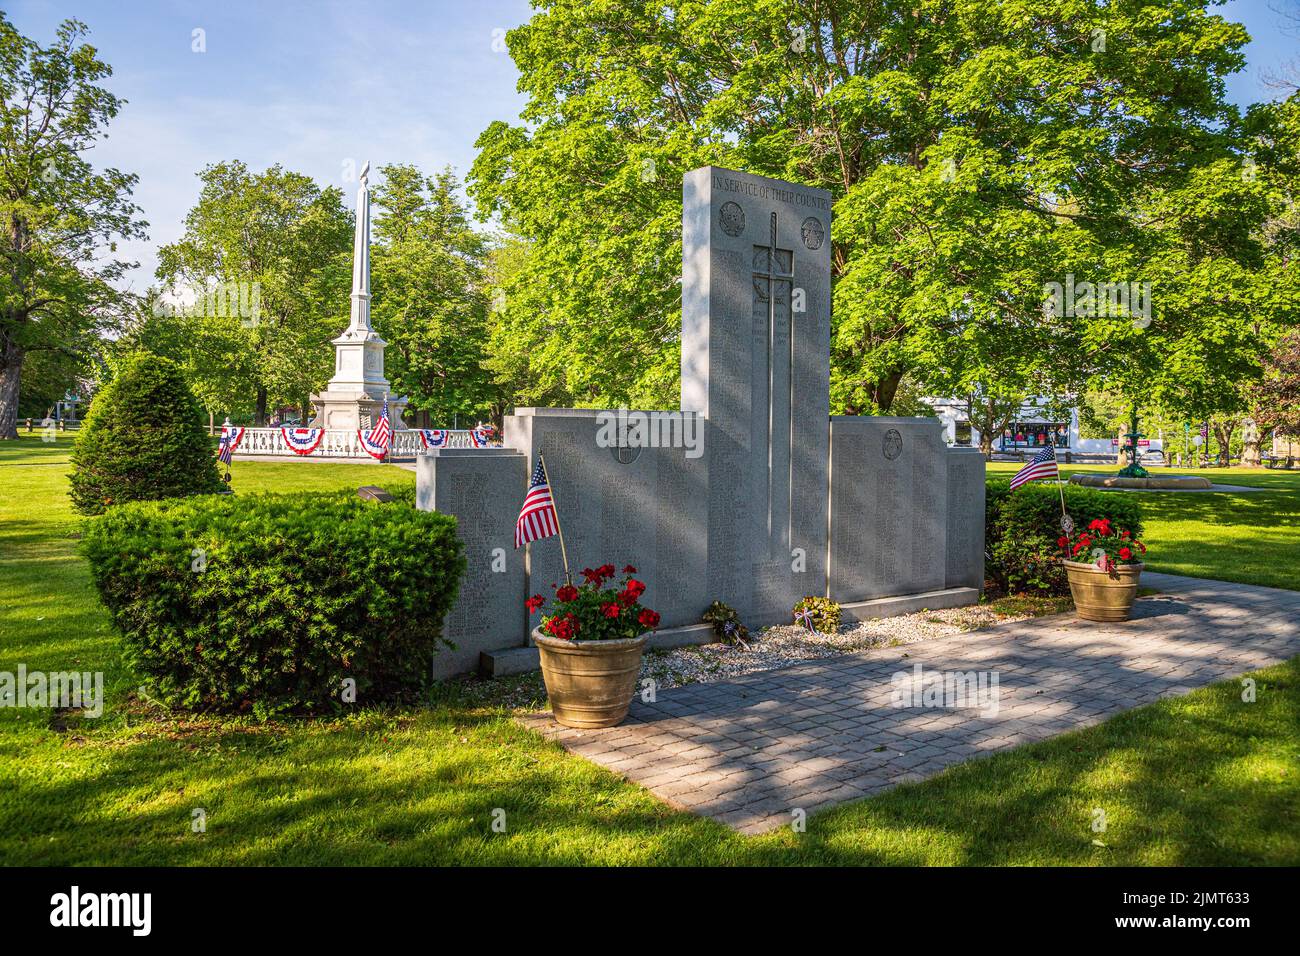 The World War 2 Monument on the Barre, MA Town Common Stock Photo